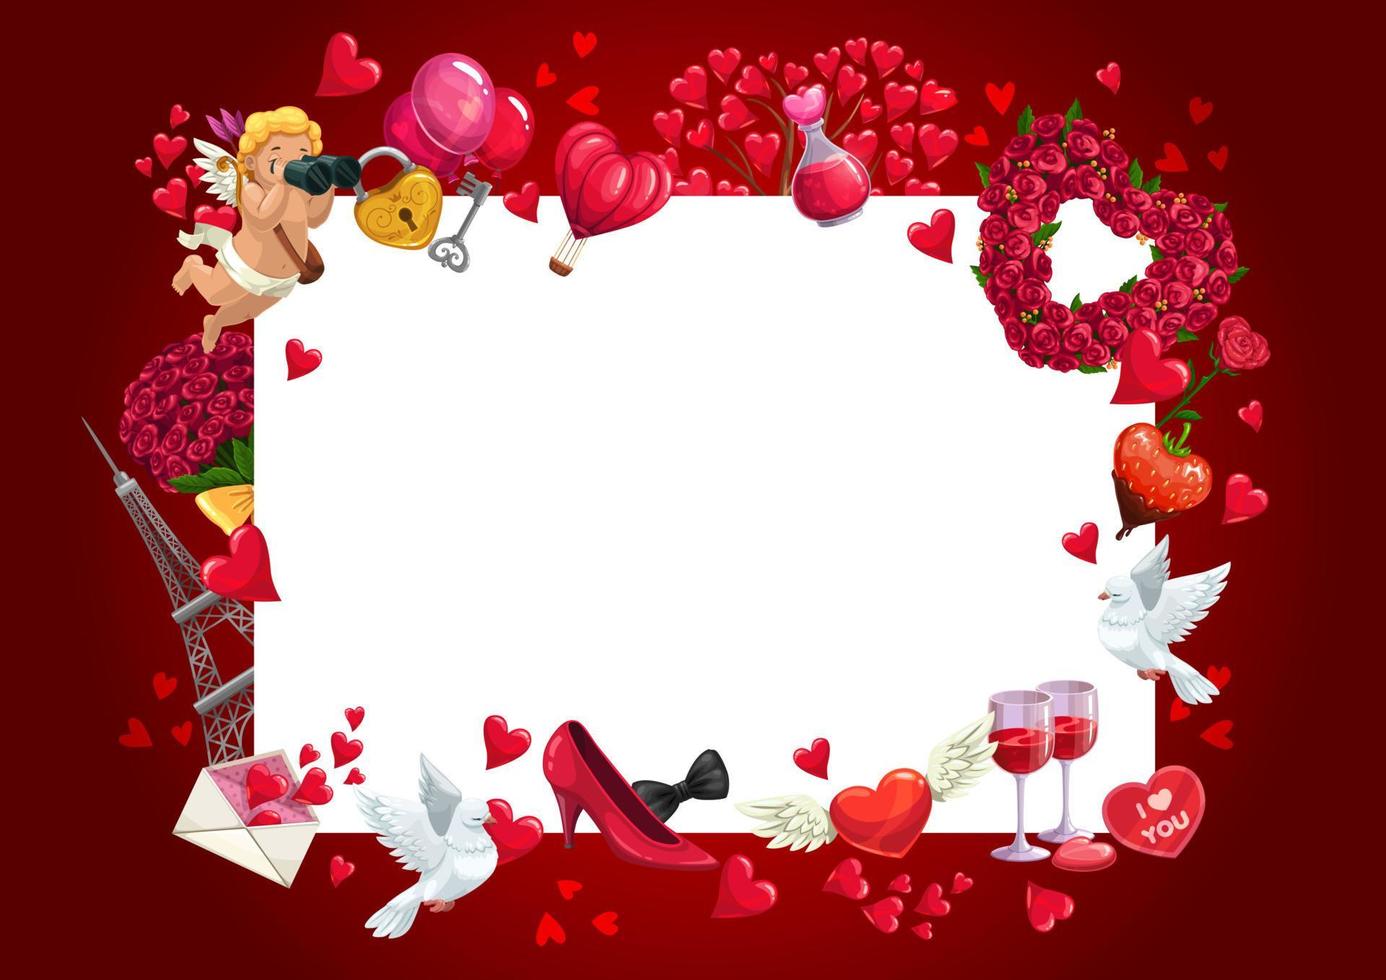 Valentines Day frame of Cupid, flowers and hearts vector